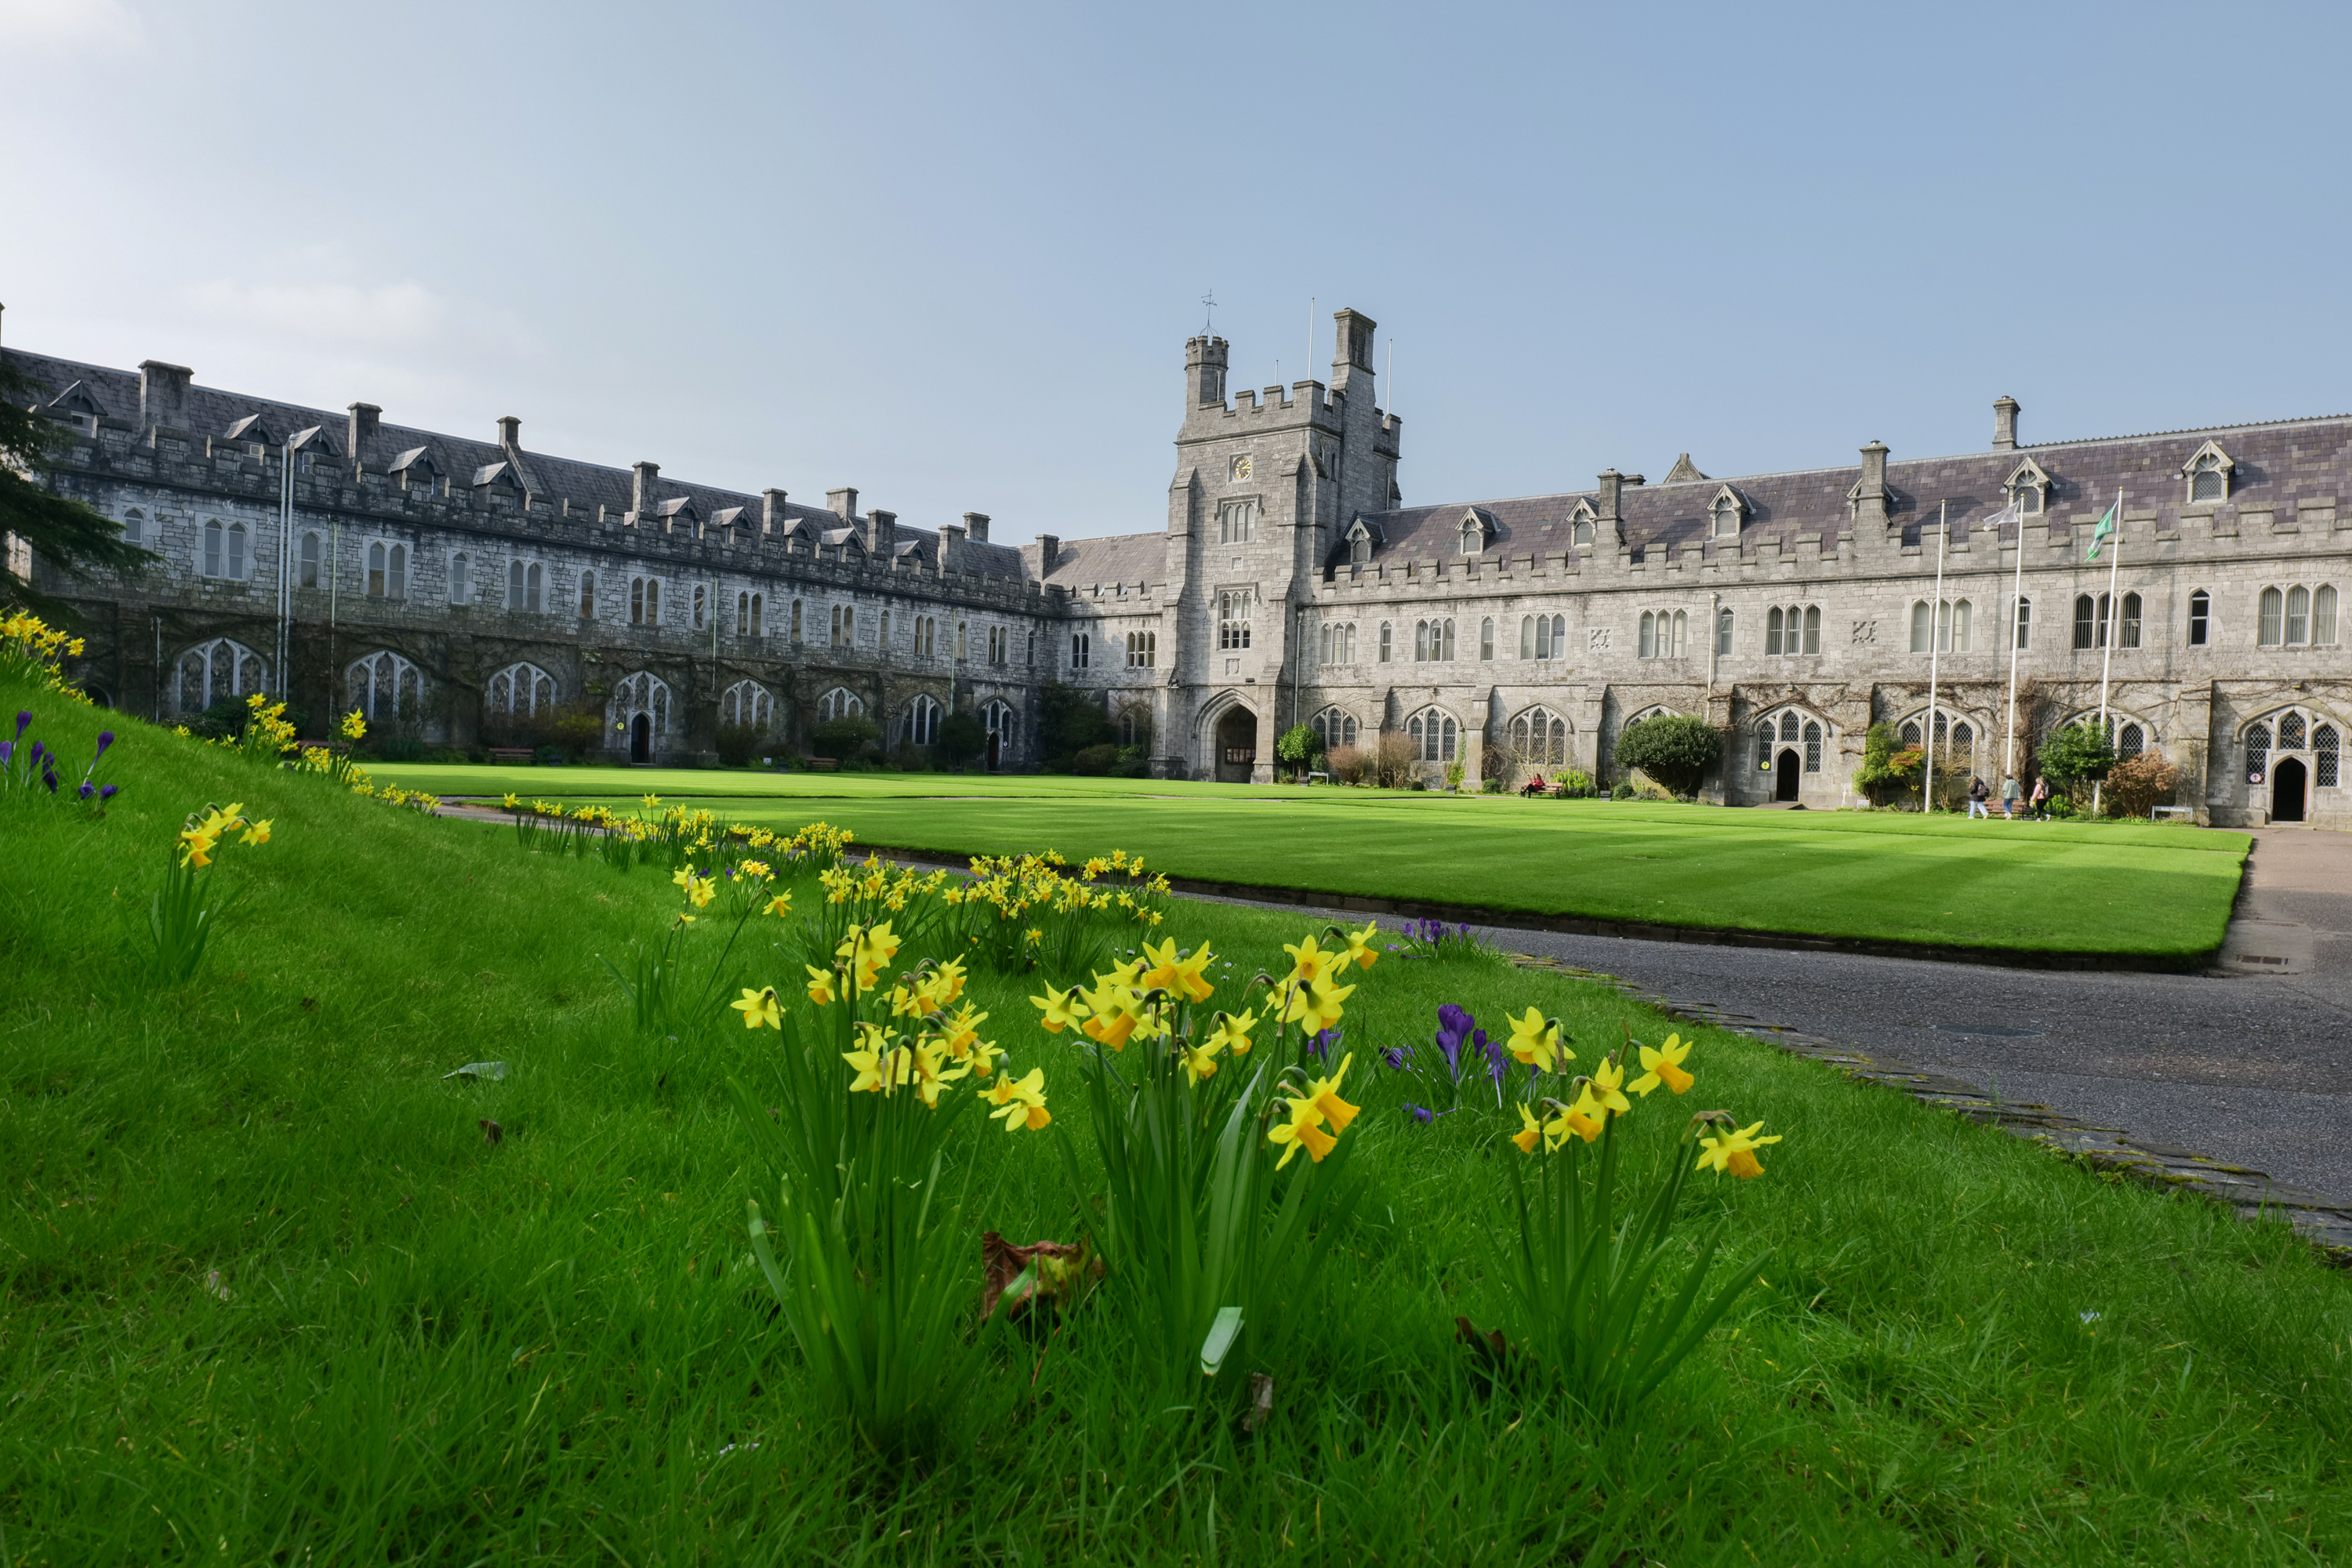 UCC ranked 8th in the world by the Times Higher Education prestigious Impact Rankings

